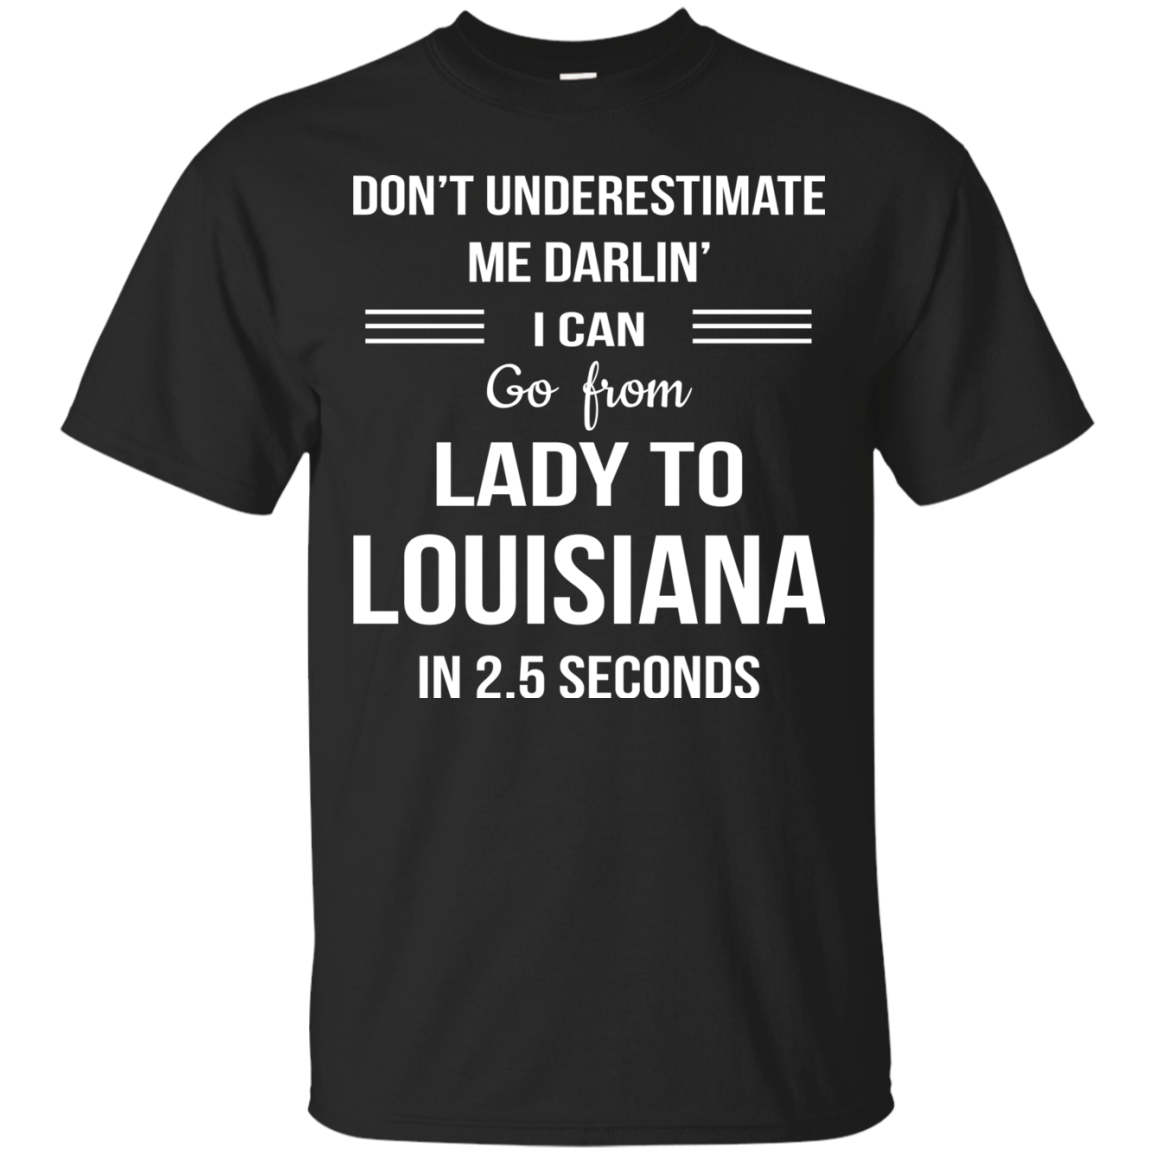 Don't underestimate me darlin' I can go from Lady to Louisiana in 2.5 seconds Shirt